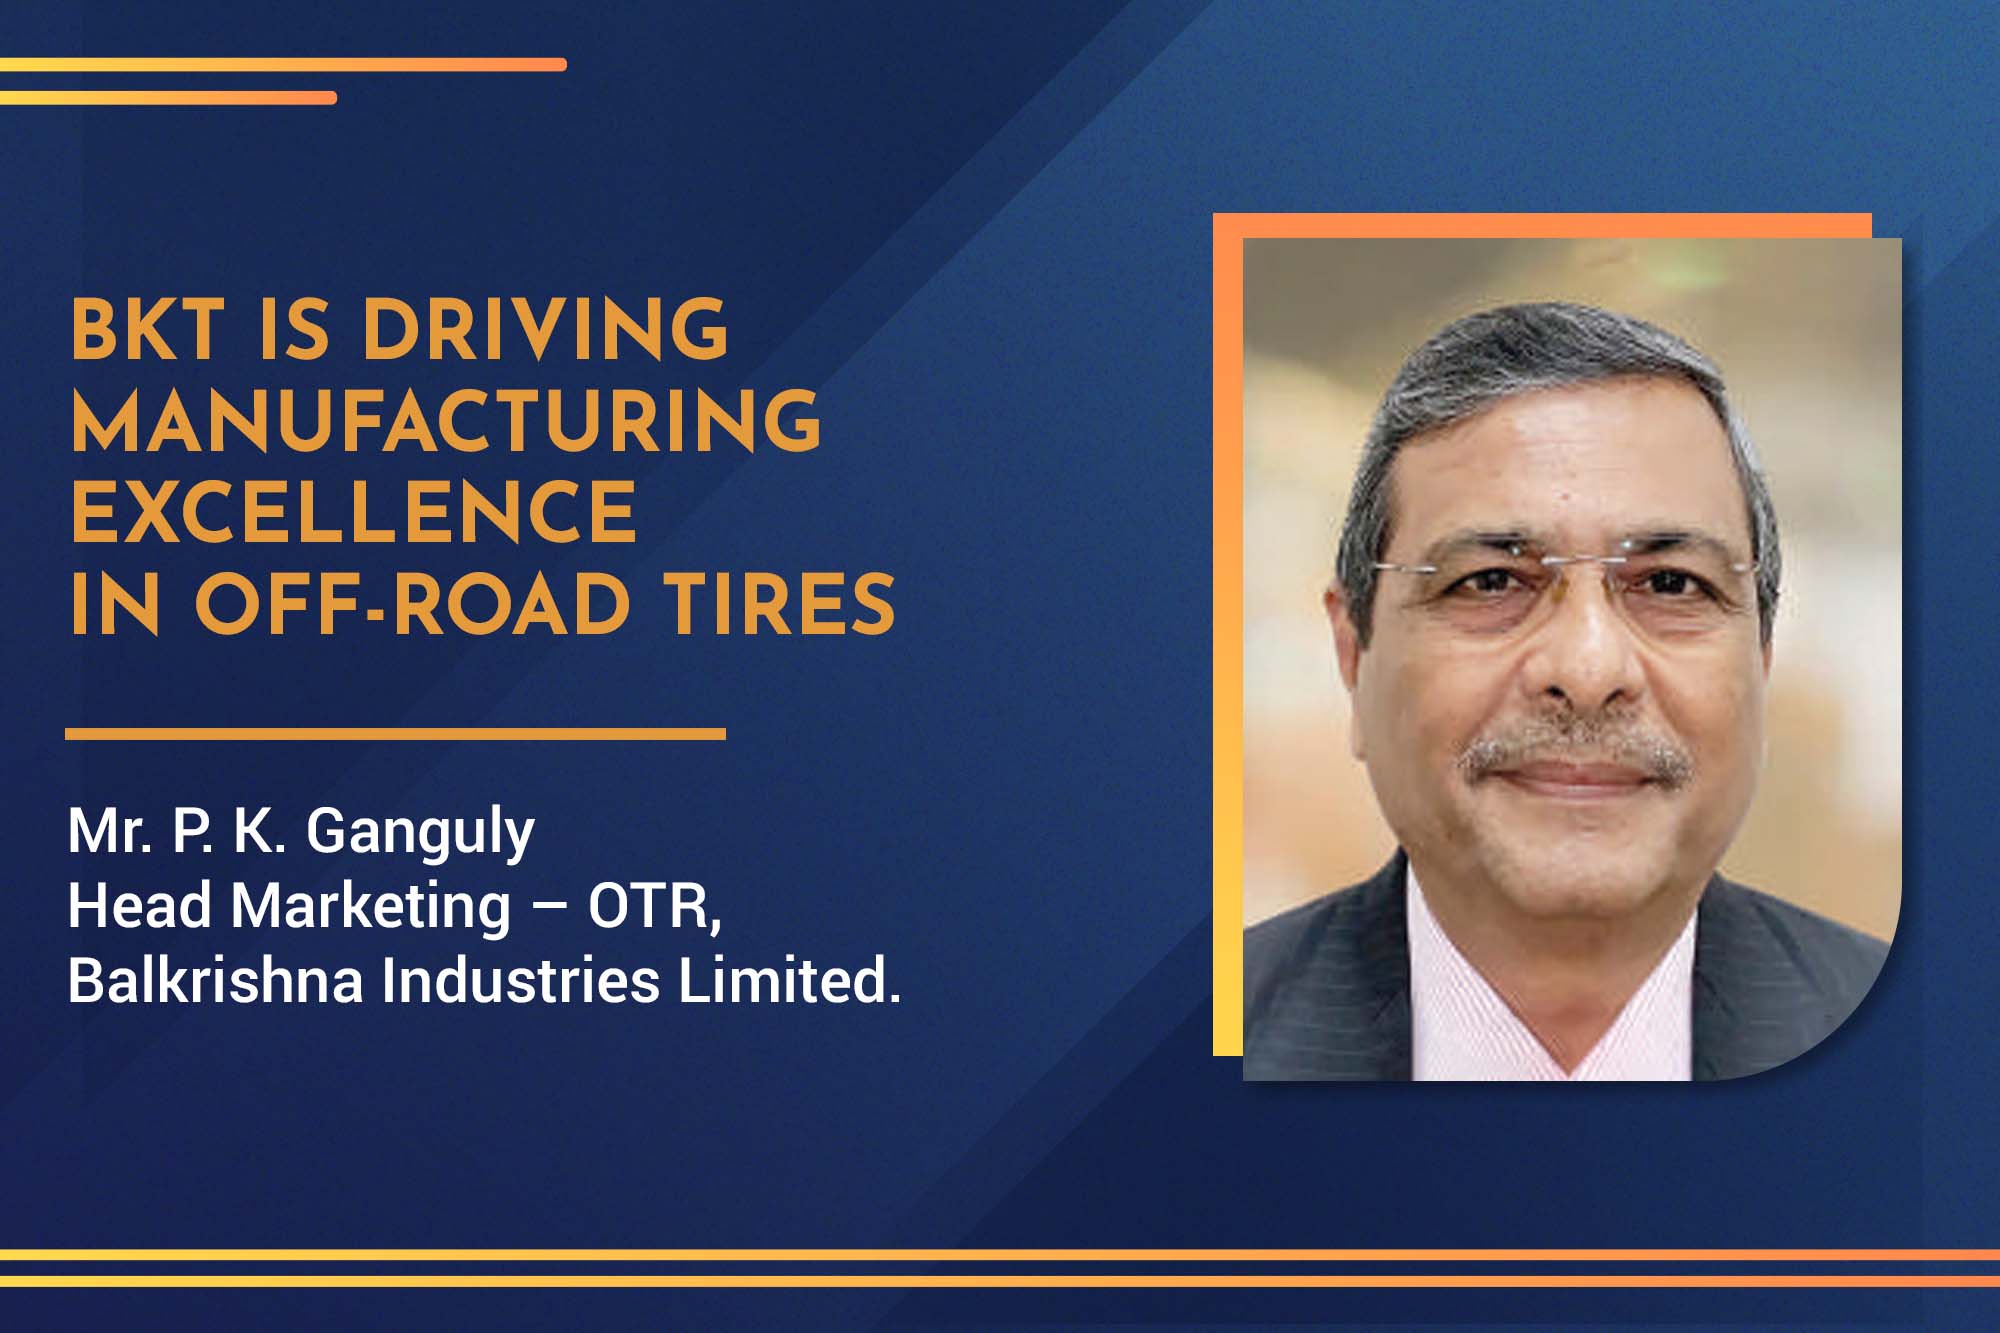 BKT is driving manufacturing excellence in off-road tires